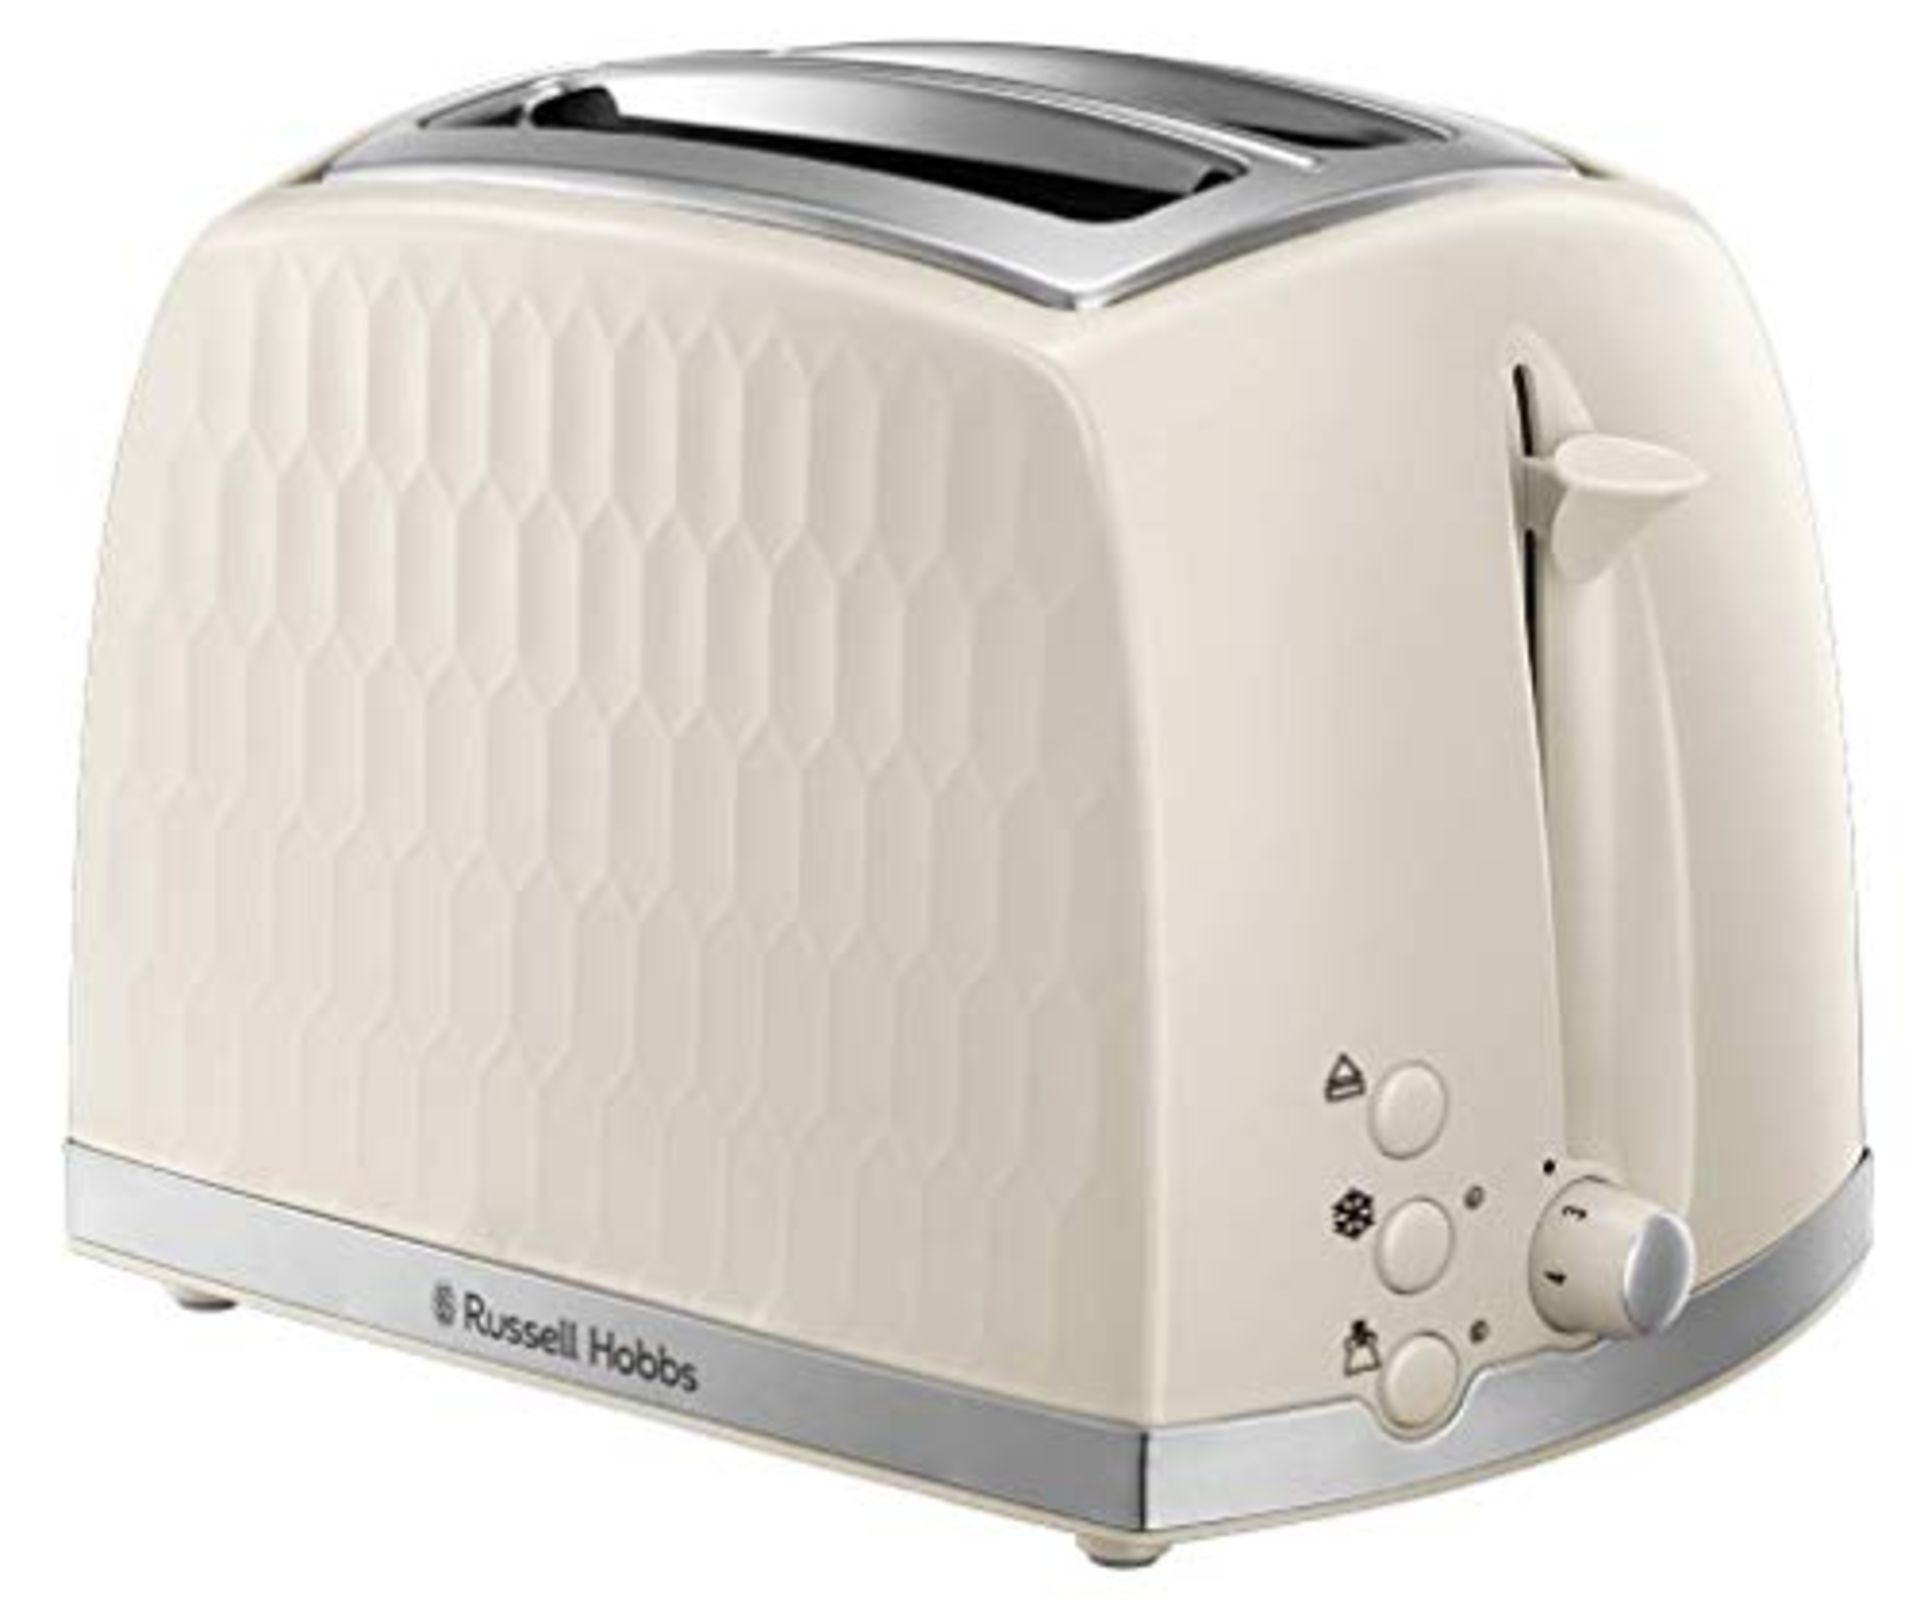 Russell Hobbs 26062 2 Slice Toaster - Contemporary Honeycomb Design with Extra Wide Sl